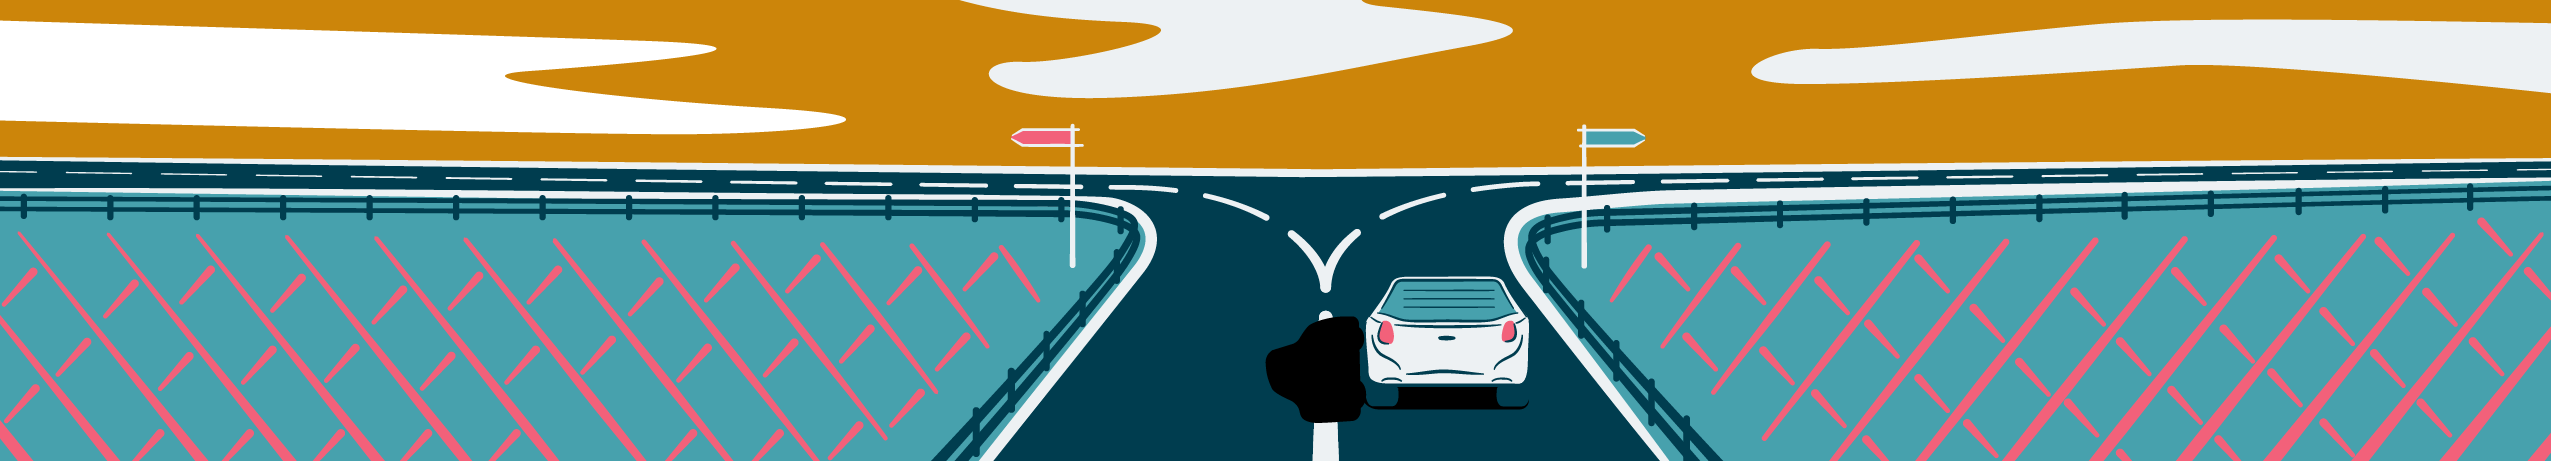 Illustration of car heading towards a crossroads, suggesting evolution and change